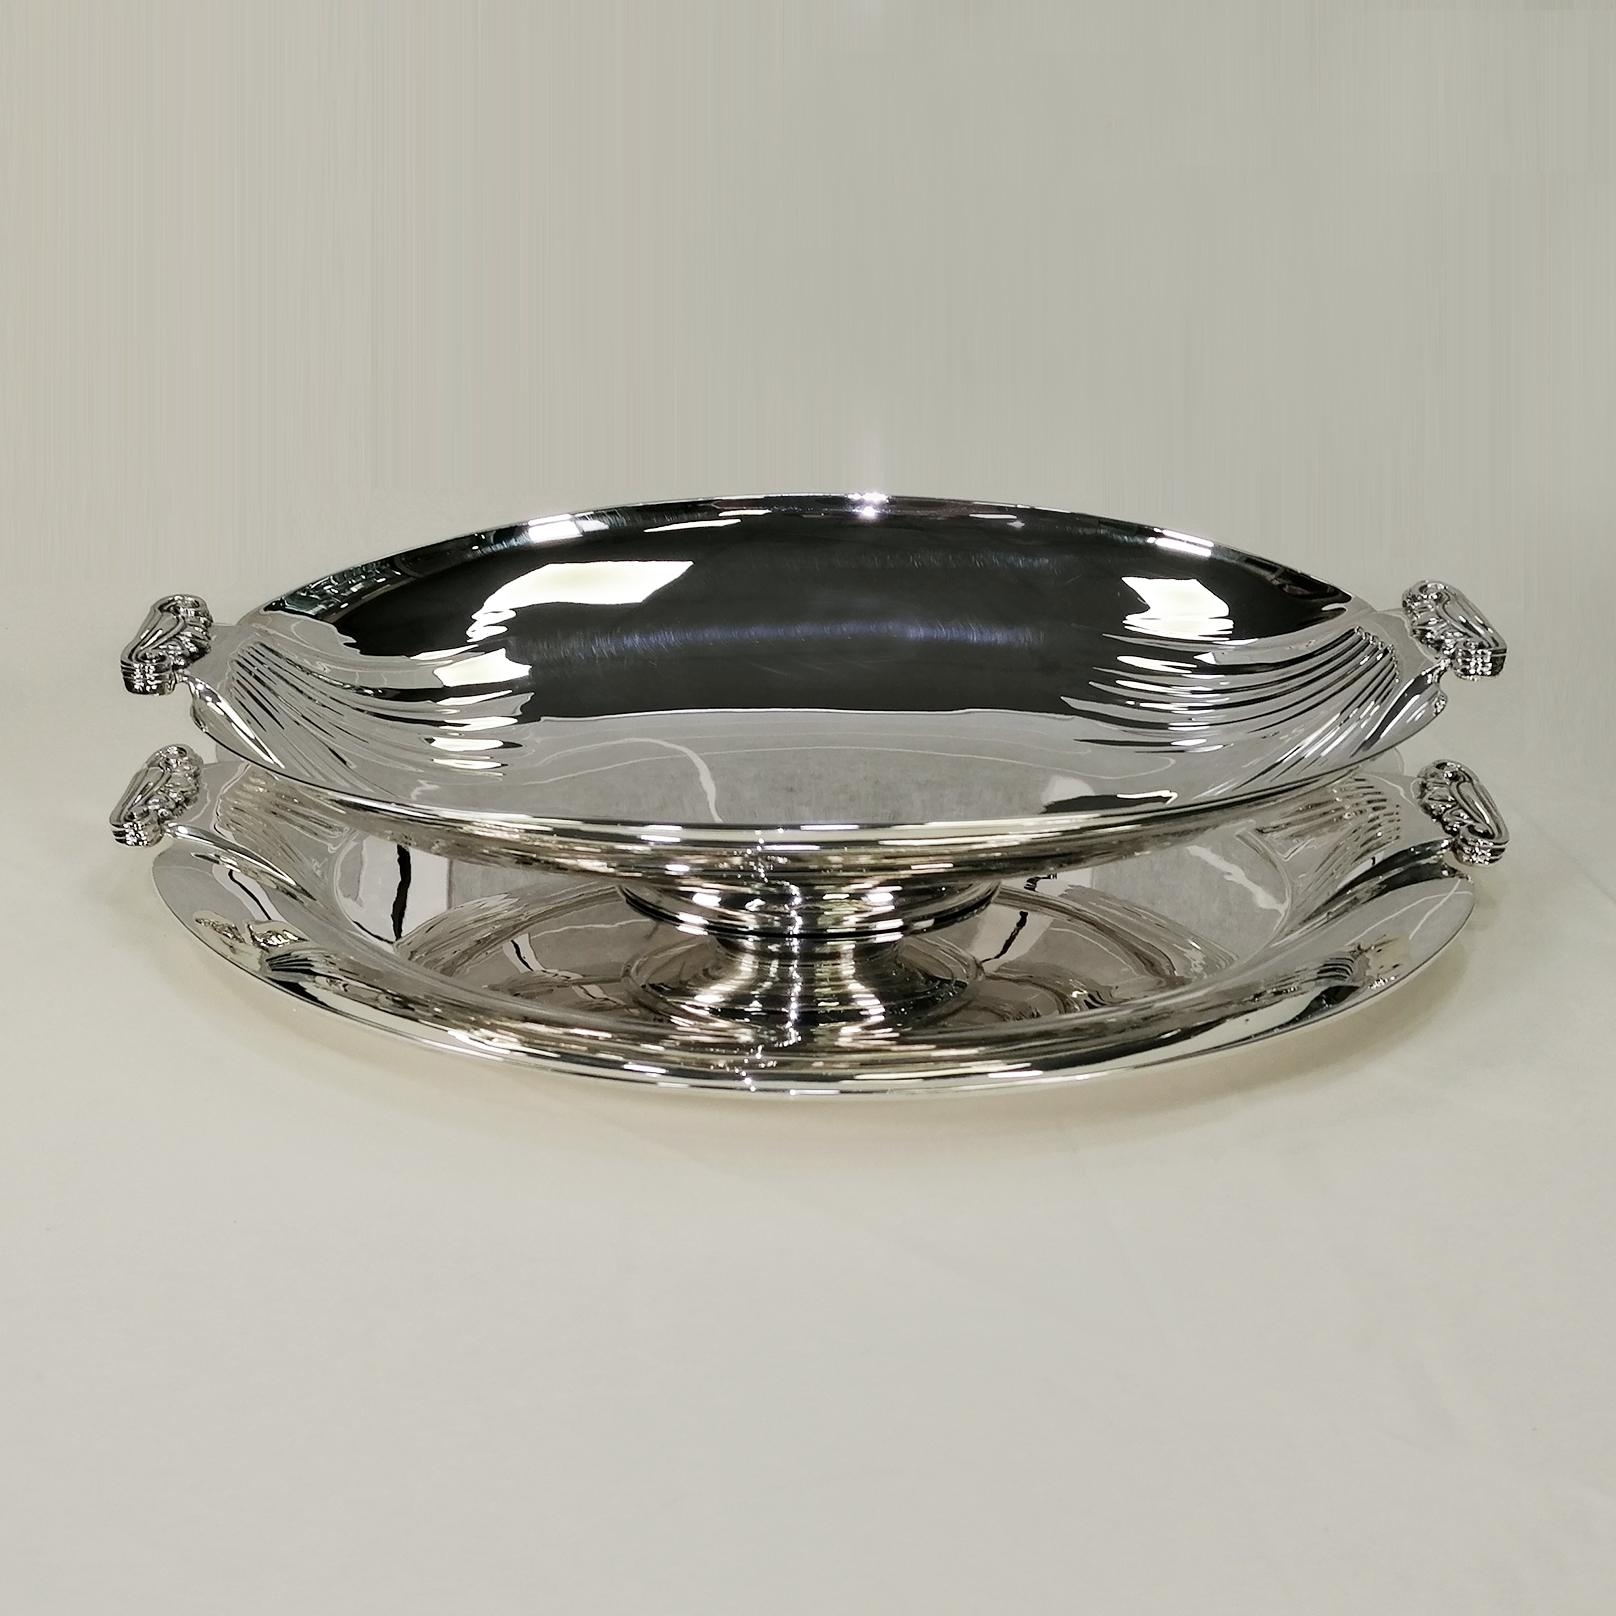 Large impressive sterling silver centerpiece comprising Jatte and tray.
The tray, with a large support surface, is oval with a raised and edged edge.
Striations have been embossed on both sides, ending with 2 capital-shaped handles made with the